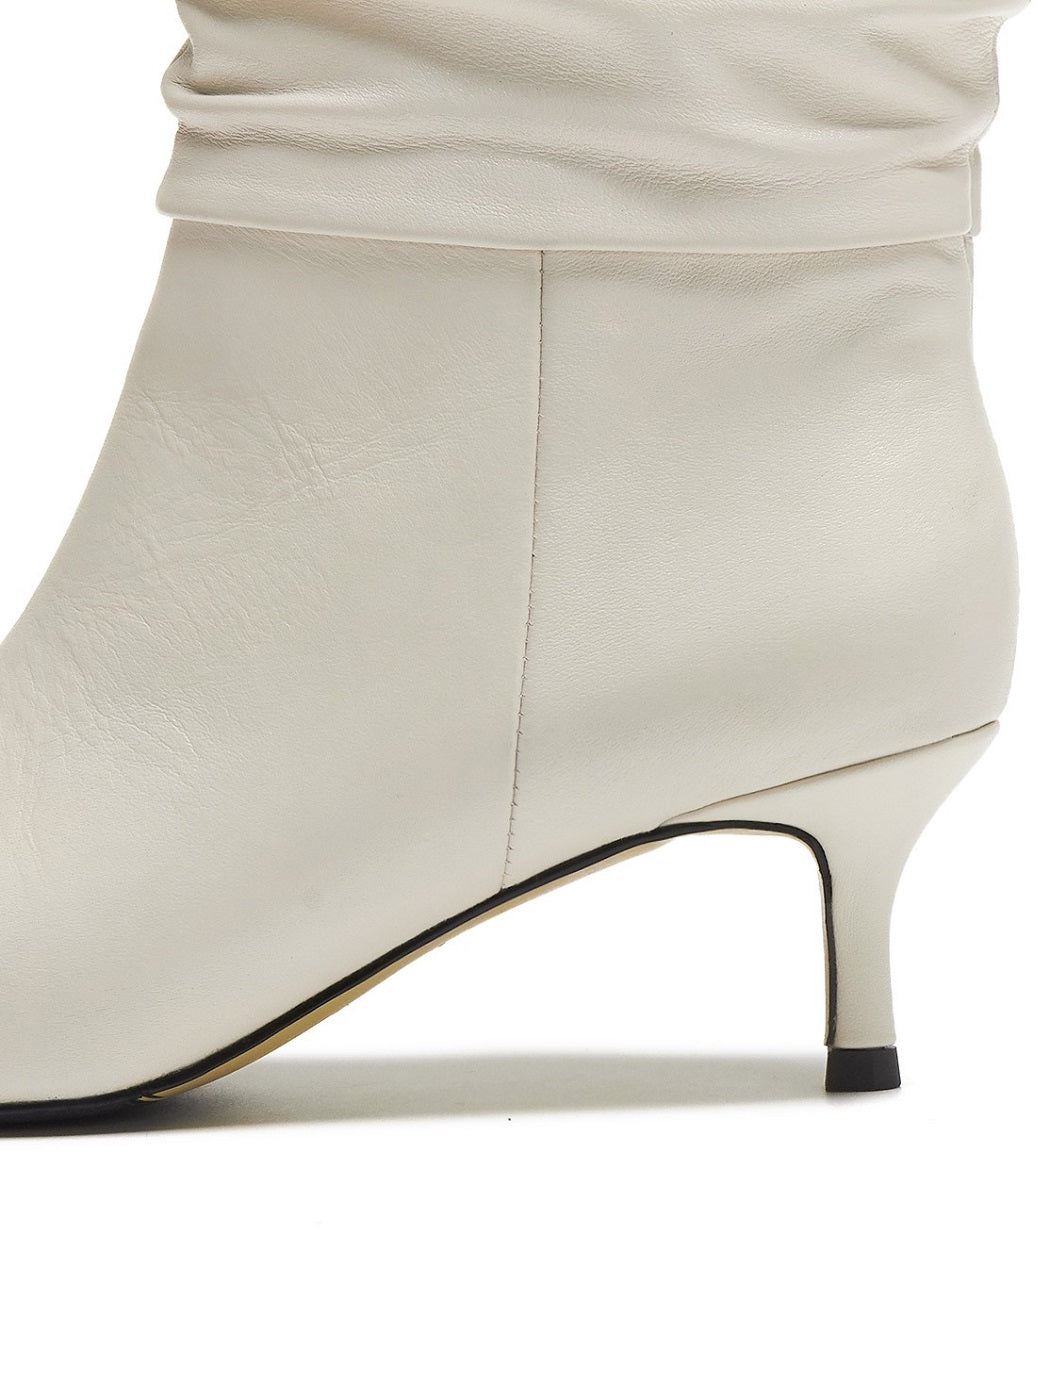 ROLISA-Milo-Slouchy-Ruched-Leather-Kitten-Heels-Mid-Calf-Boots-White-2